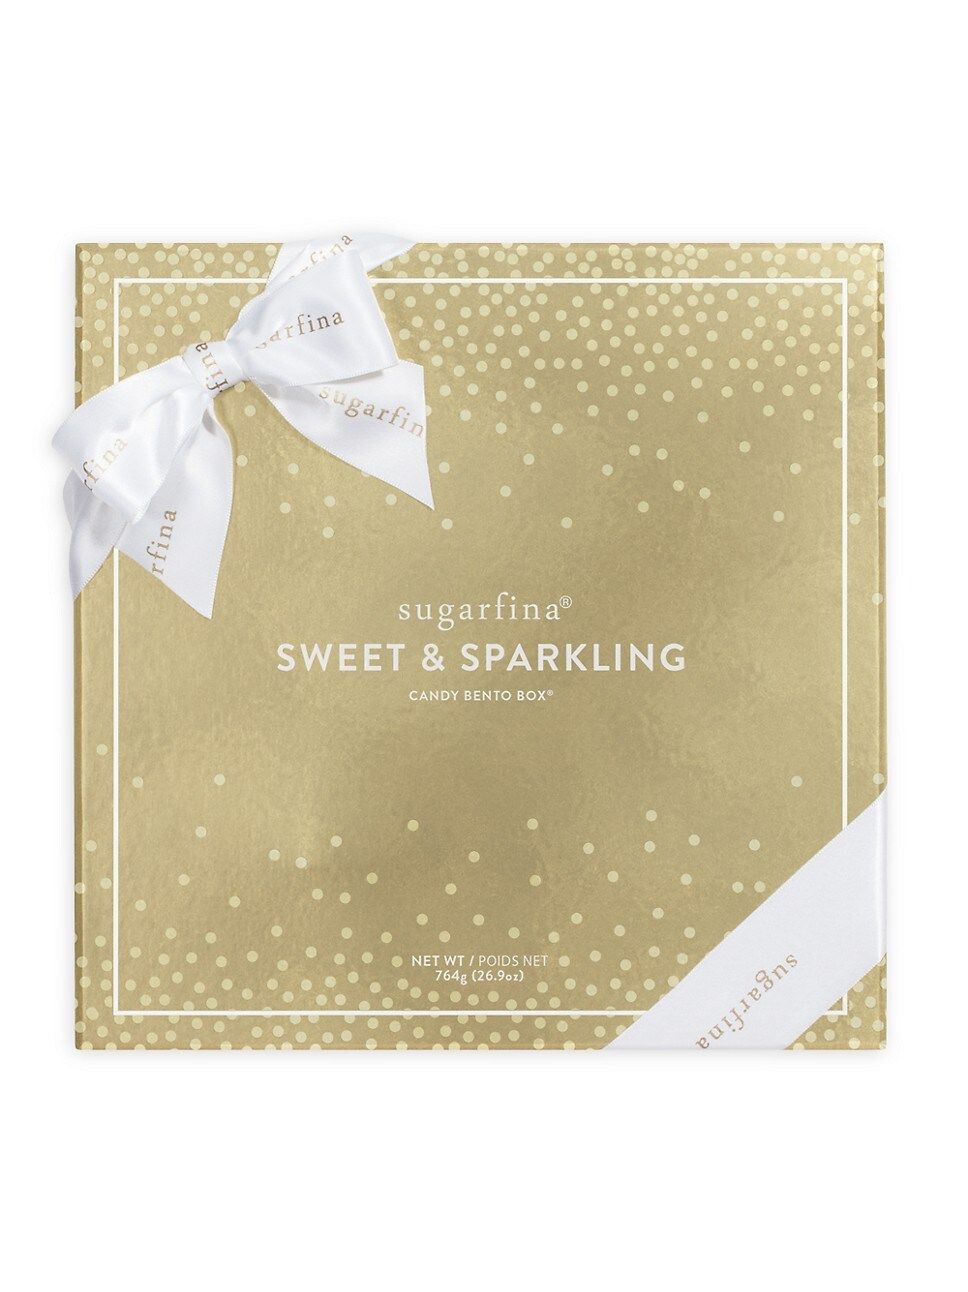 Sweet & Sparkling 8-Piece Candy Set | Saks Fifth Avenue